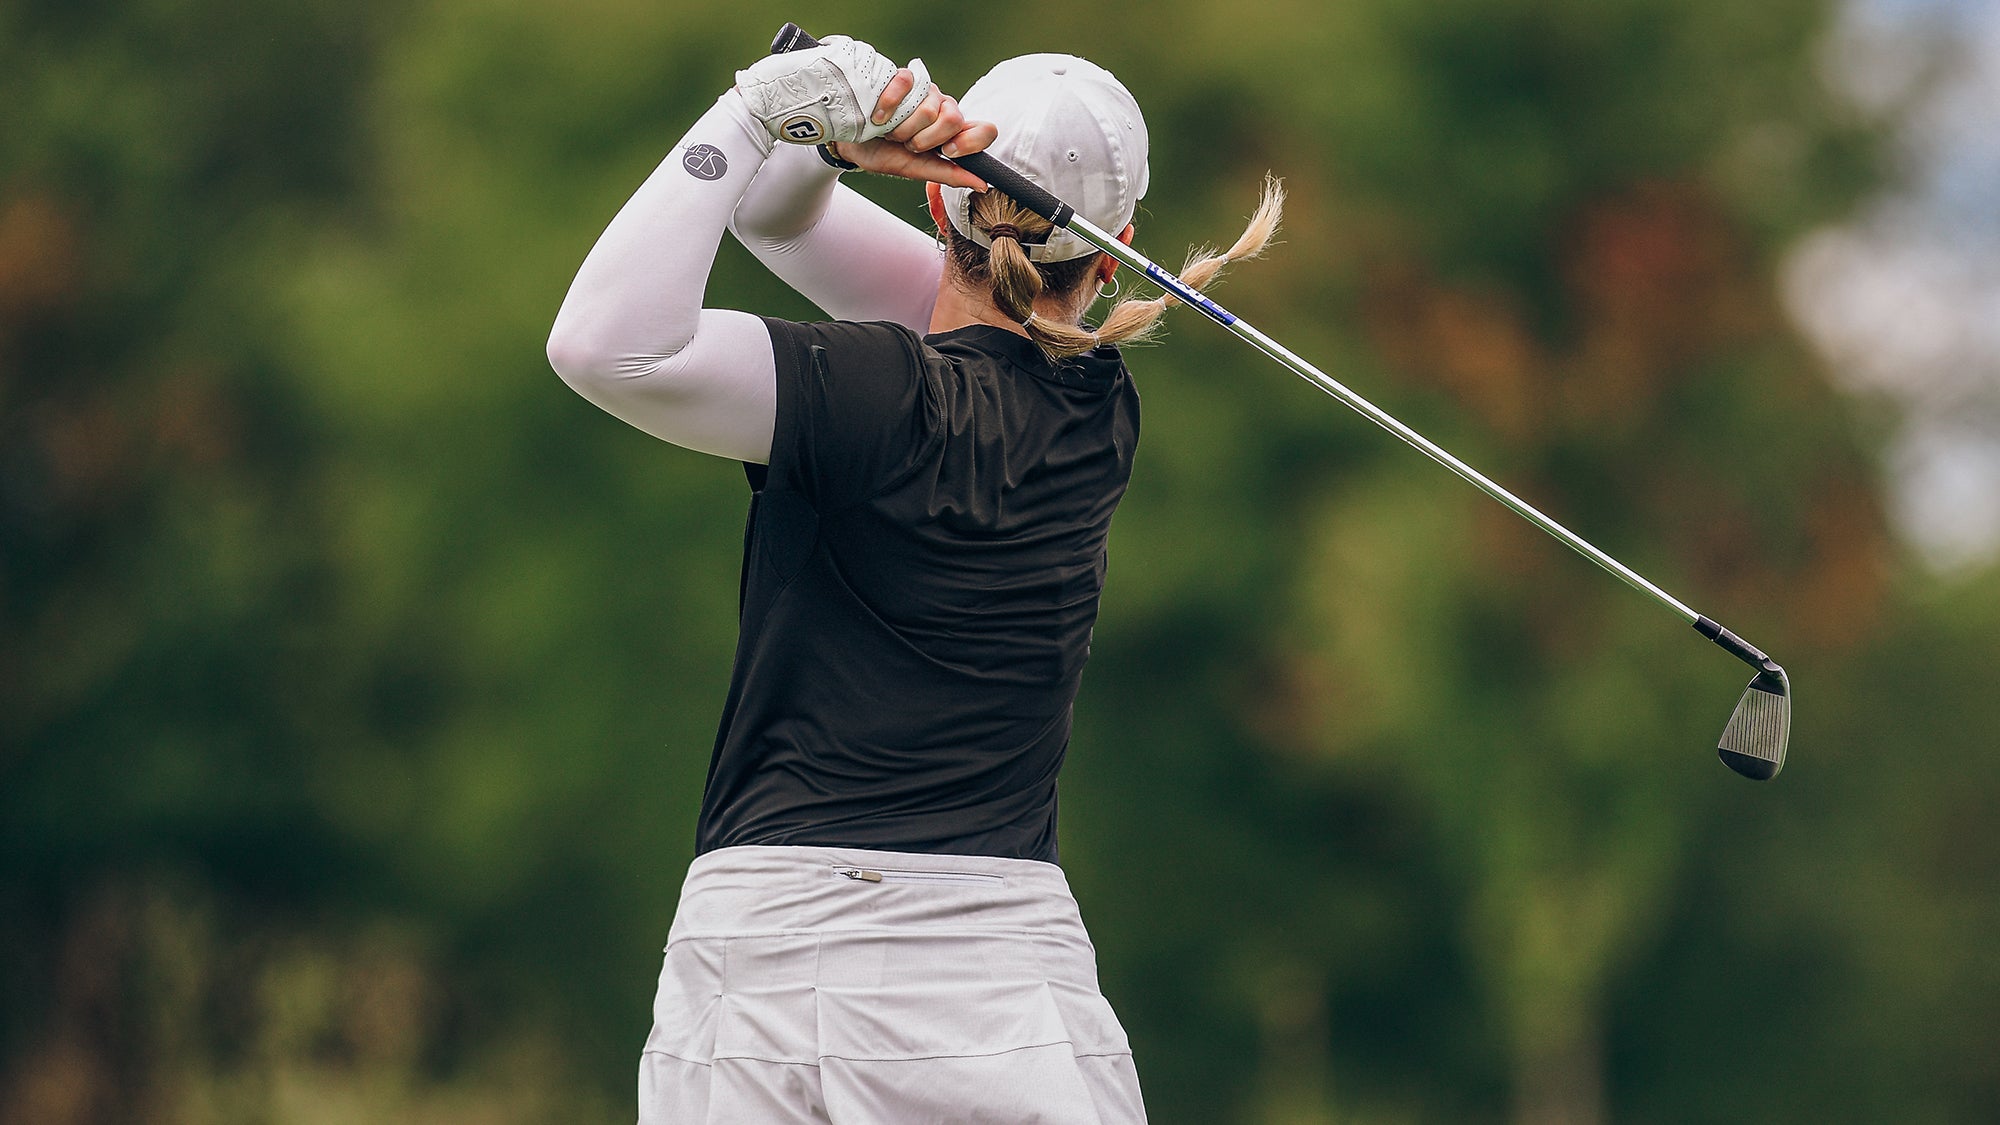 Write a blog about the The Importance of Shoulder Rotation in a Proper Golf Swing